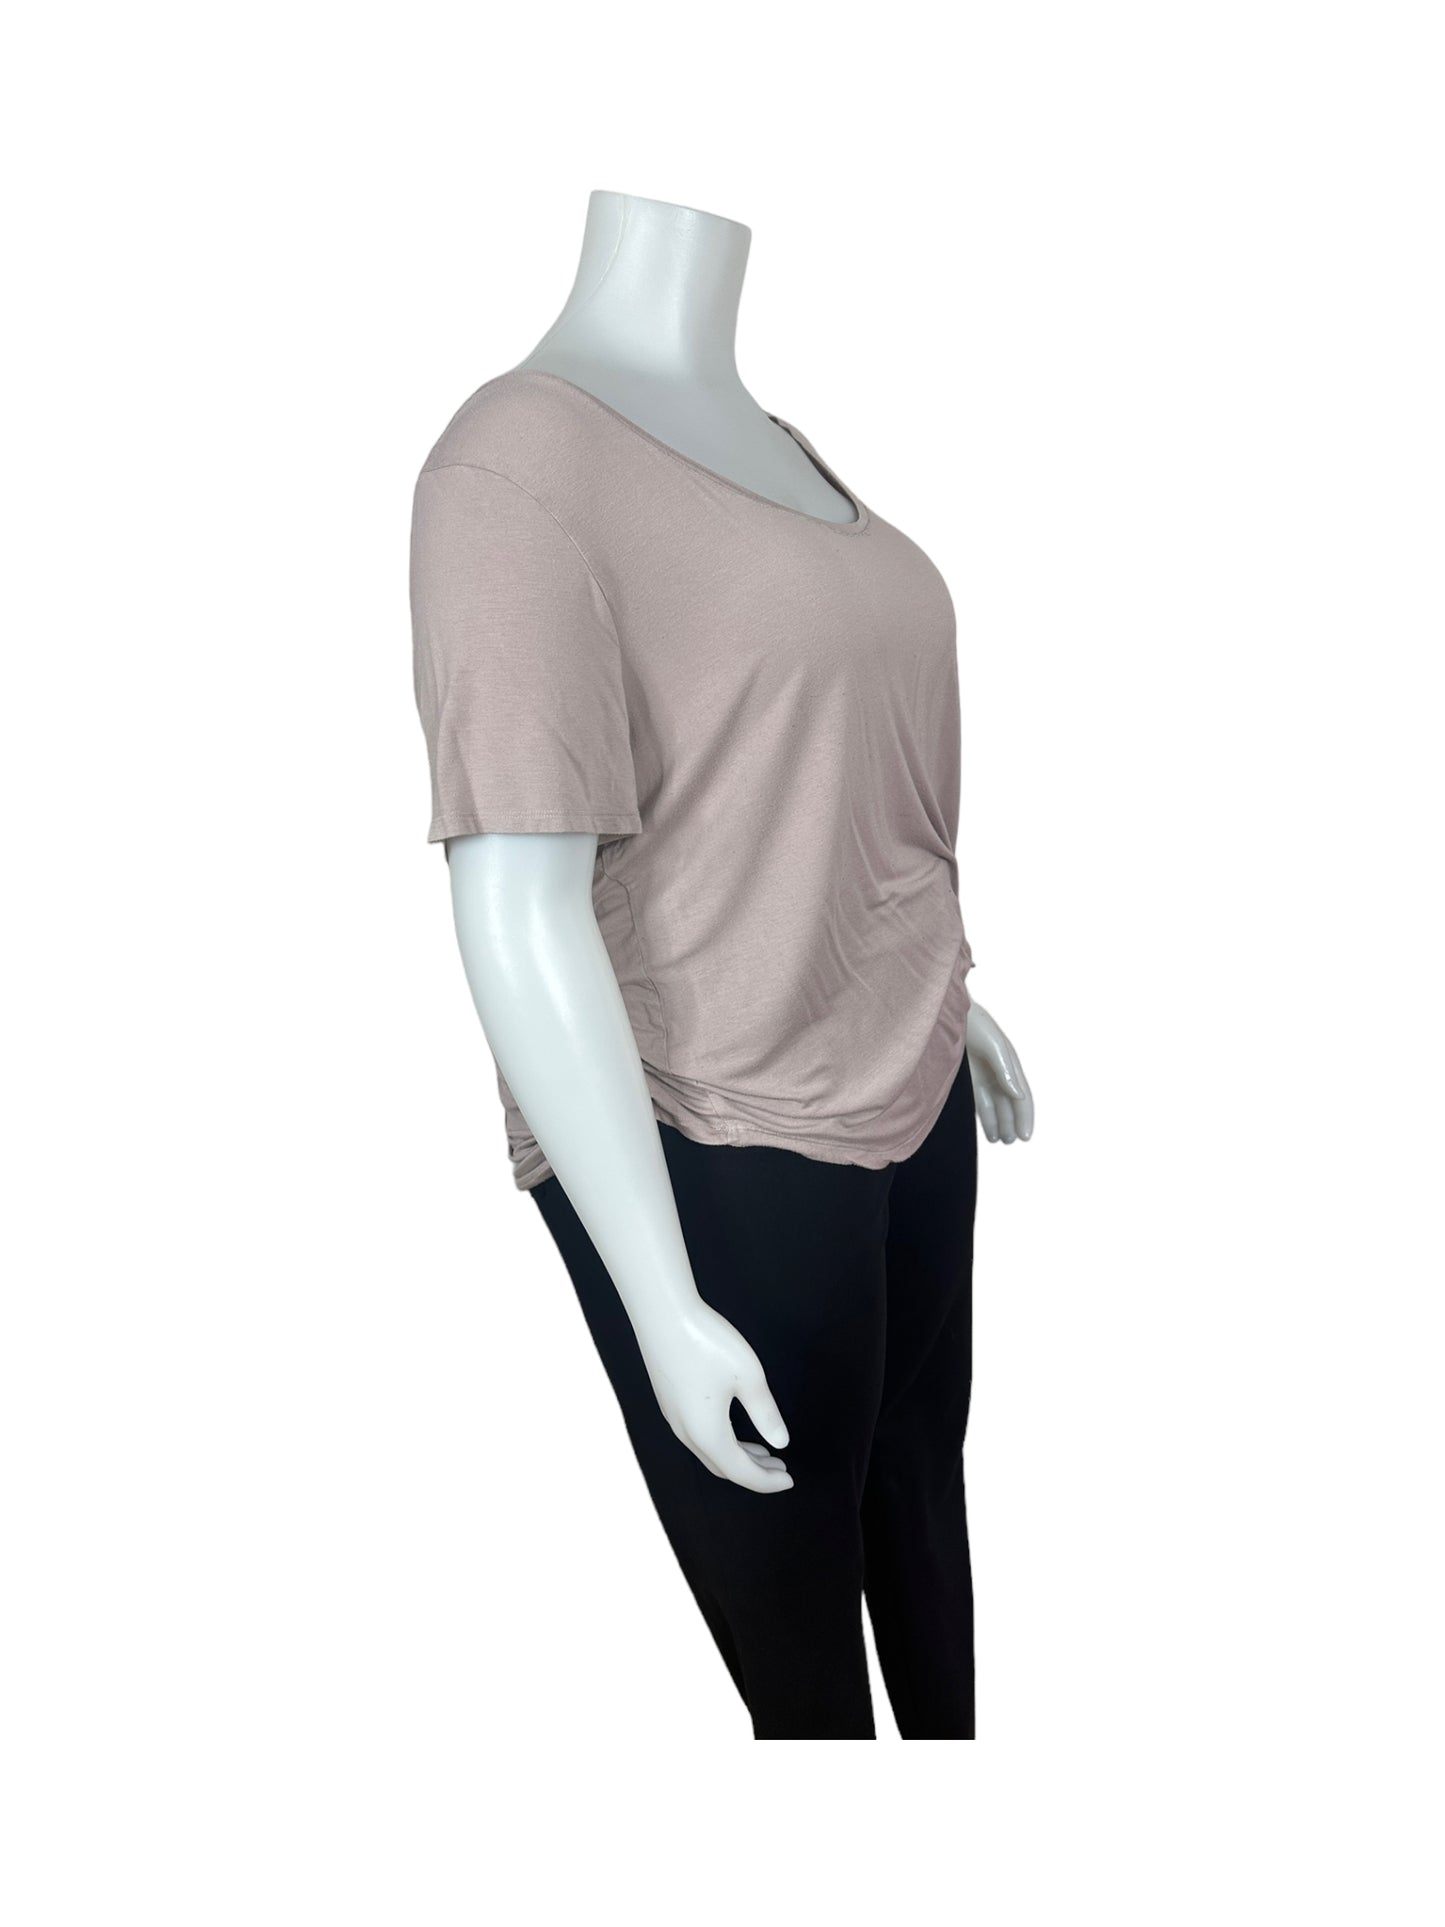 “Old Navy” Pink T-Shirt w/ Tied Knot on left hip (XXL)